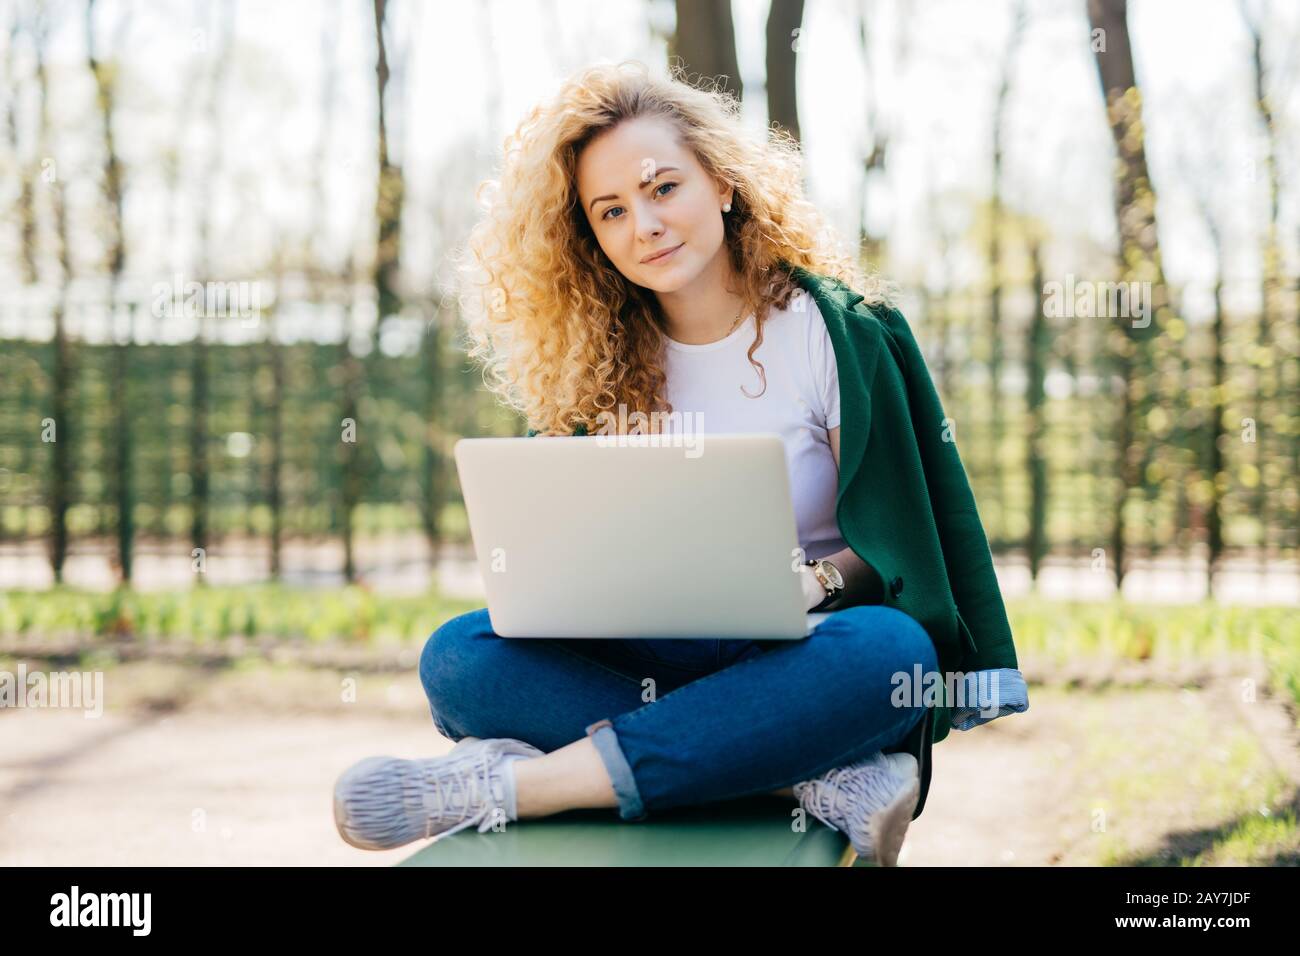 Caucasian female with curly light hair and blue eyes wearing comfortable clothes sitting crossed-legs outdoors holding laptop on her knees messaging w Stock Photo